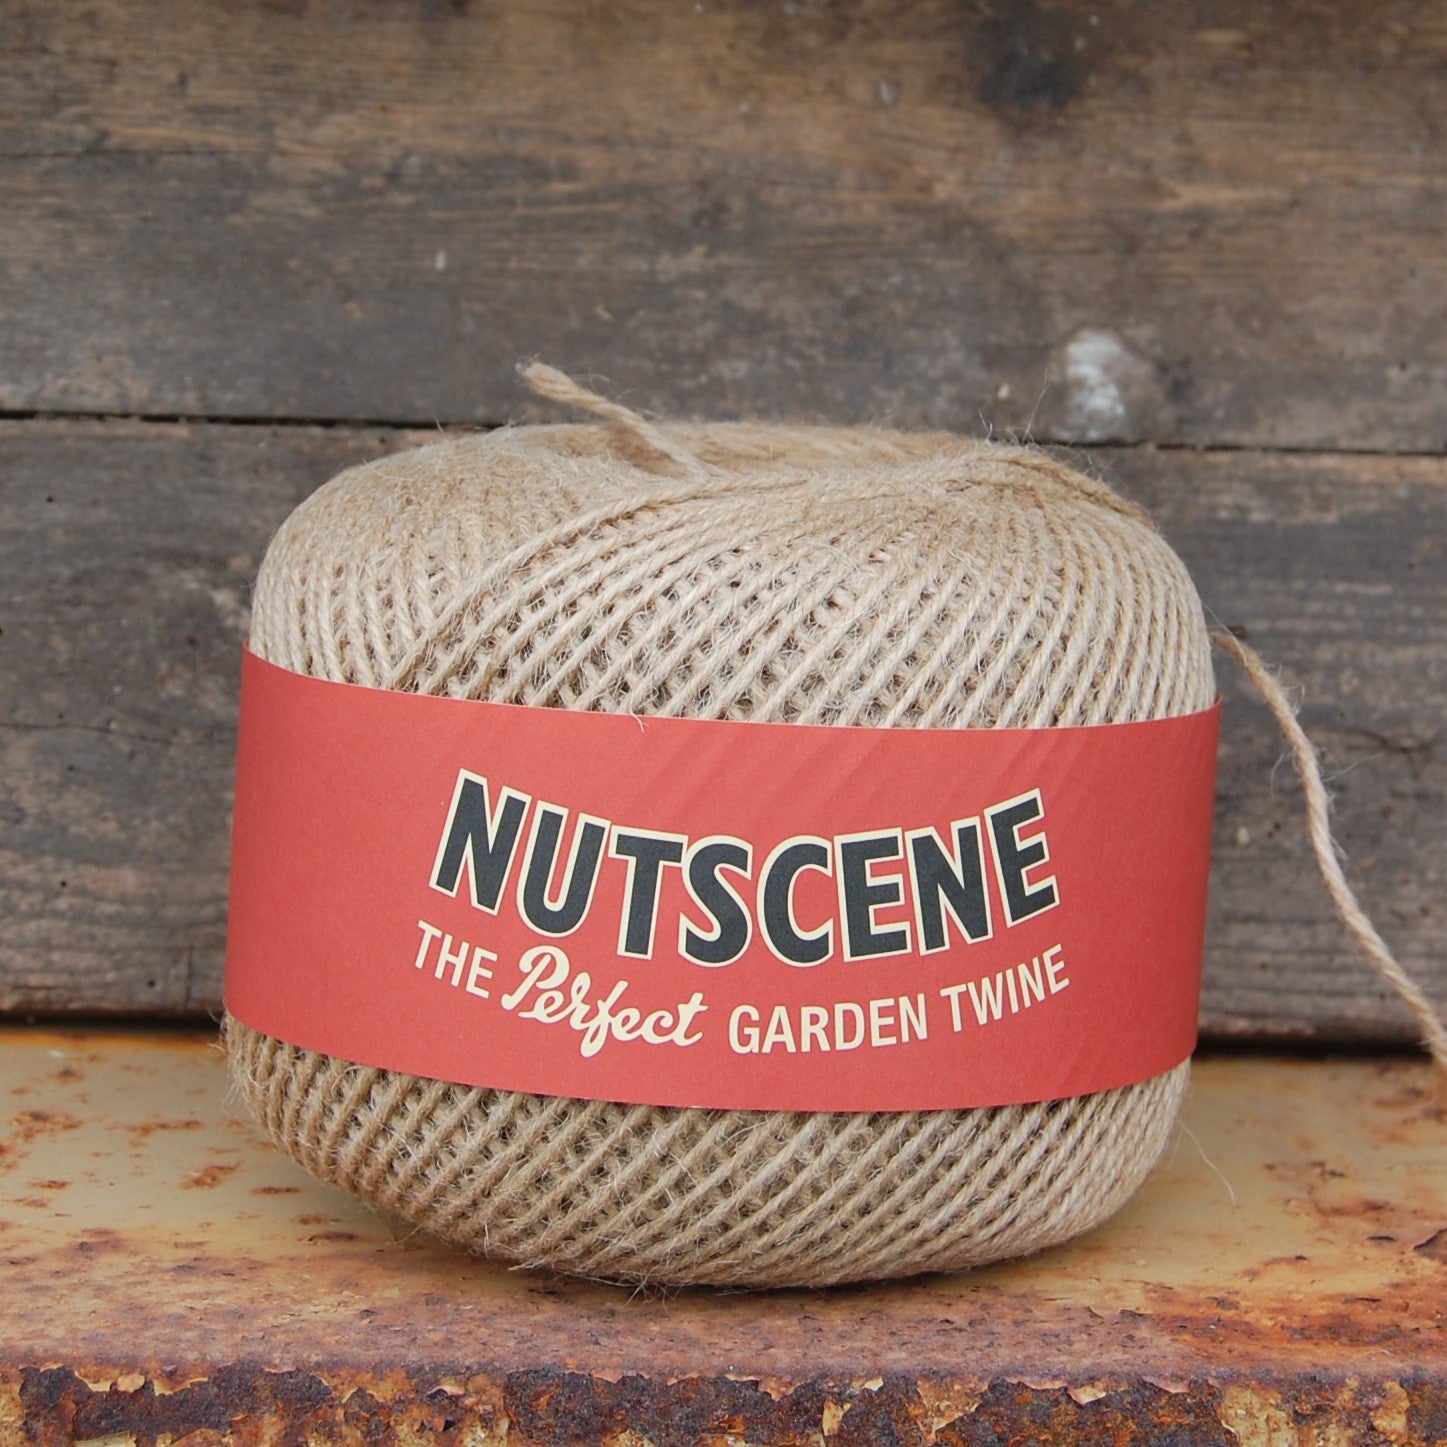 Large Balls of Twine jute String - 3ply Thickness - Nutscene ®